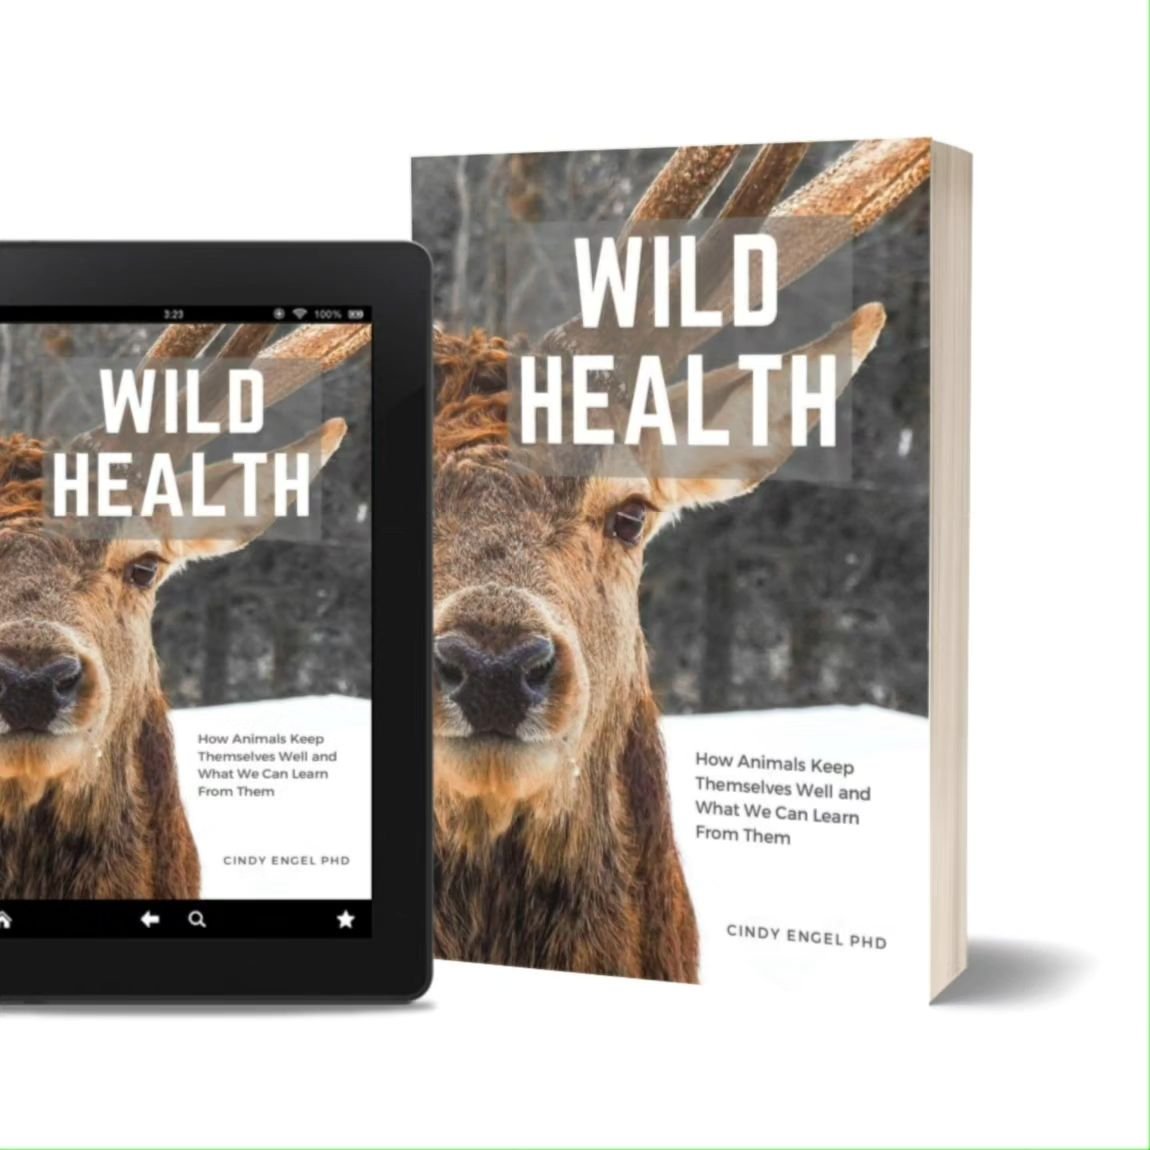 If you were fascinated by today's news of an orangutan healing a wound with a self-made medicinal paste, then you will enjoy WILD HEALTH which packed with examples of animal self medication. I hope you enjoy it.

#zoopharmacognosy #animalselfmedicati